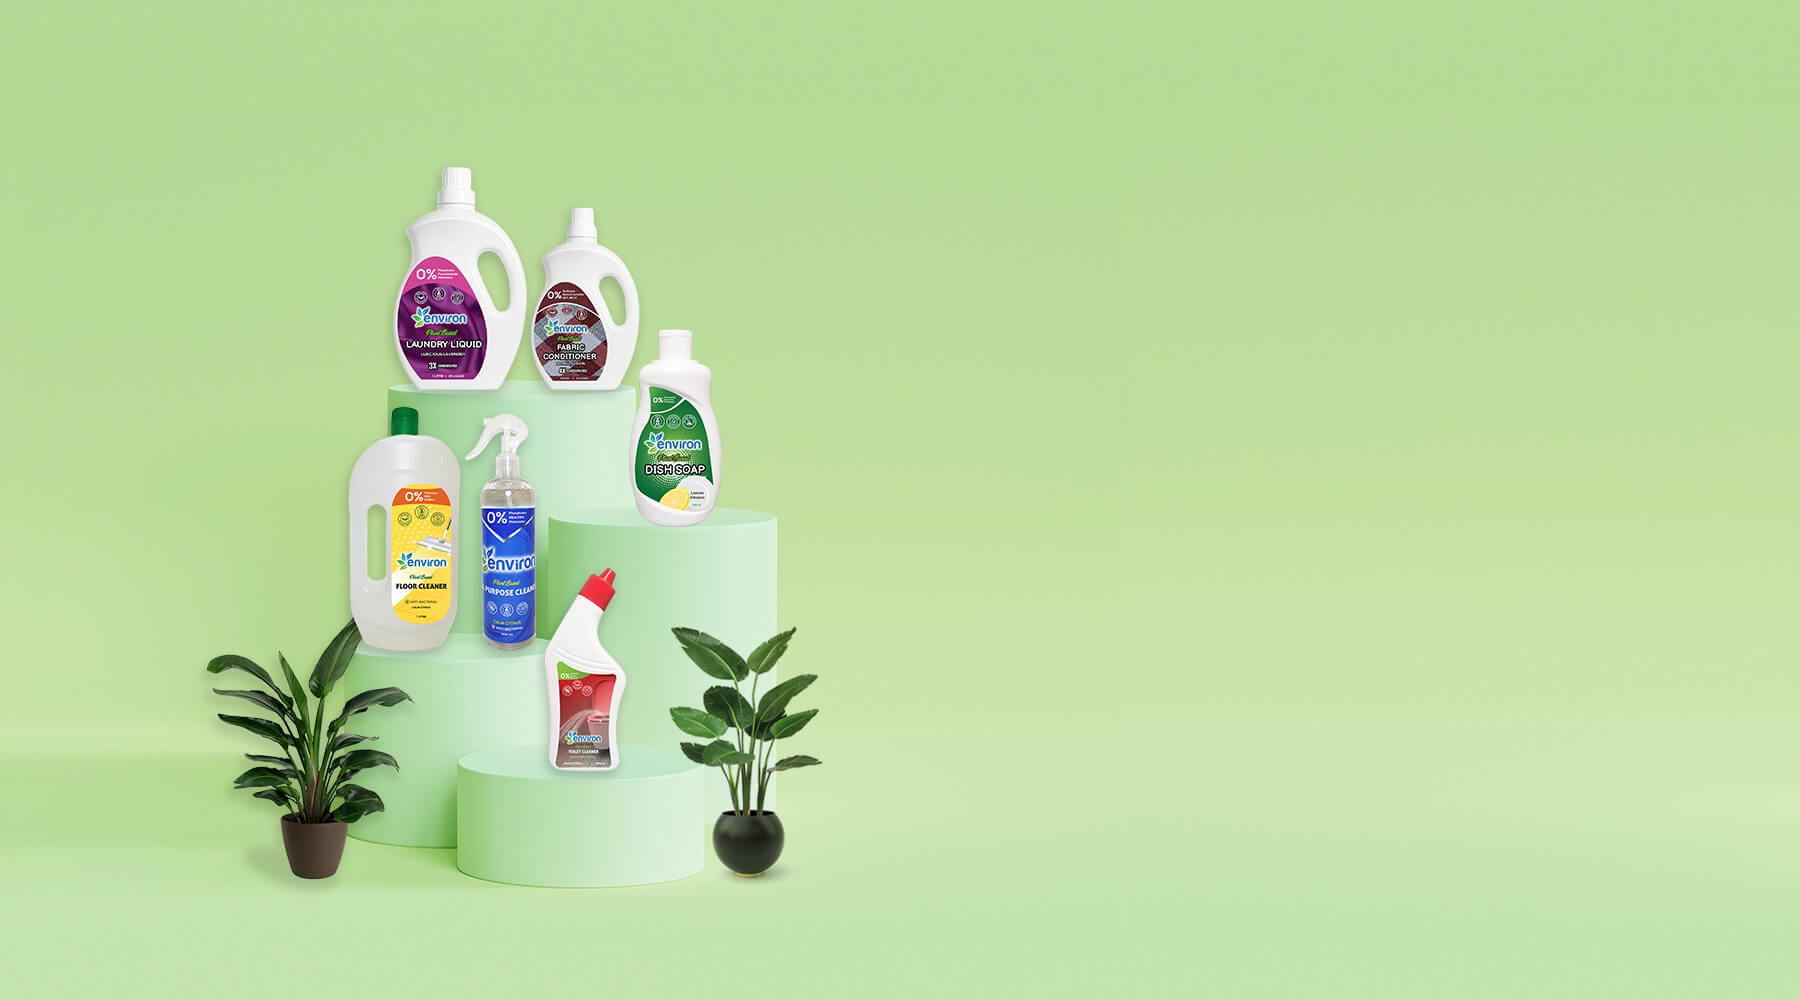 Showing all six plant-based and non-toxic products on a green pedestal signifying the green formulation used by environ